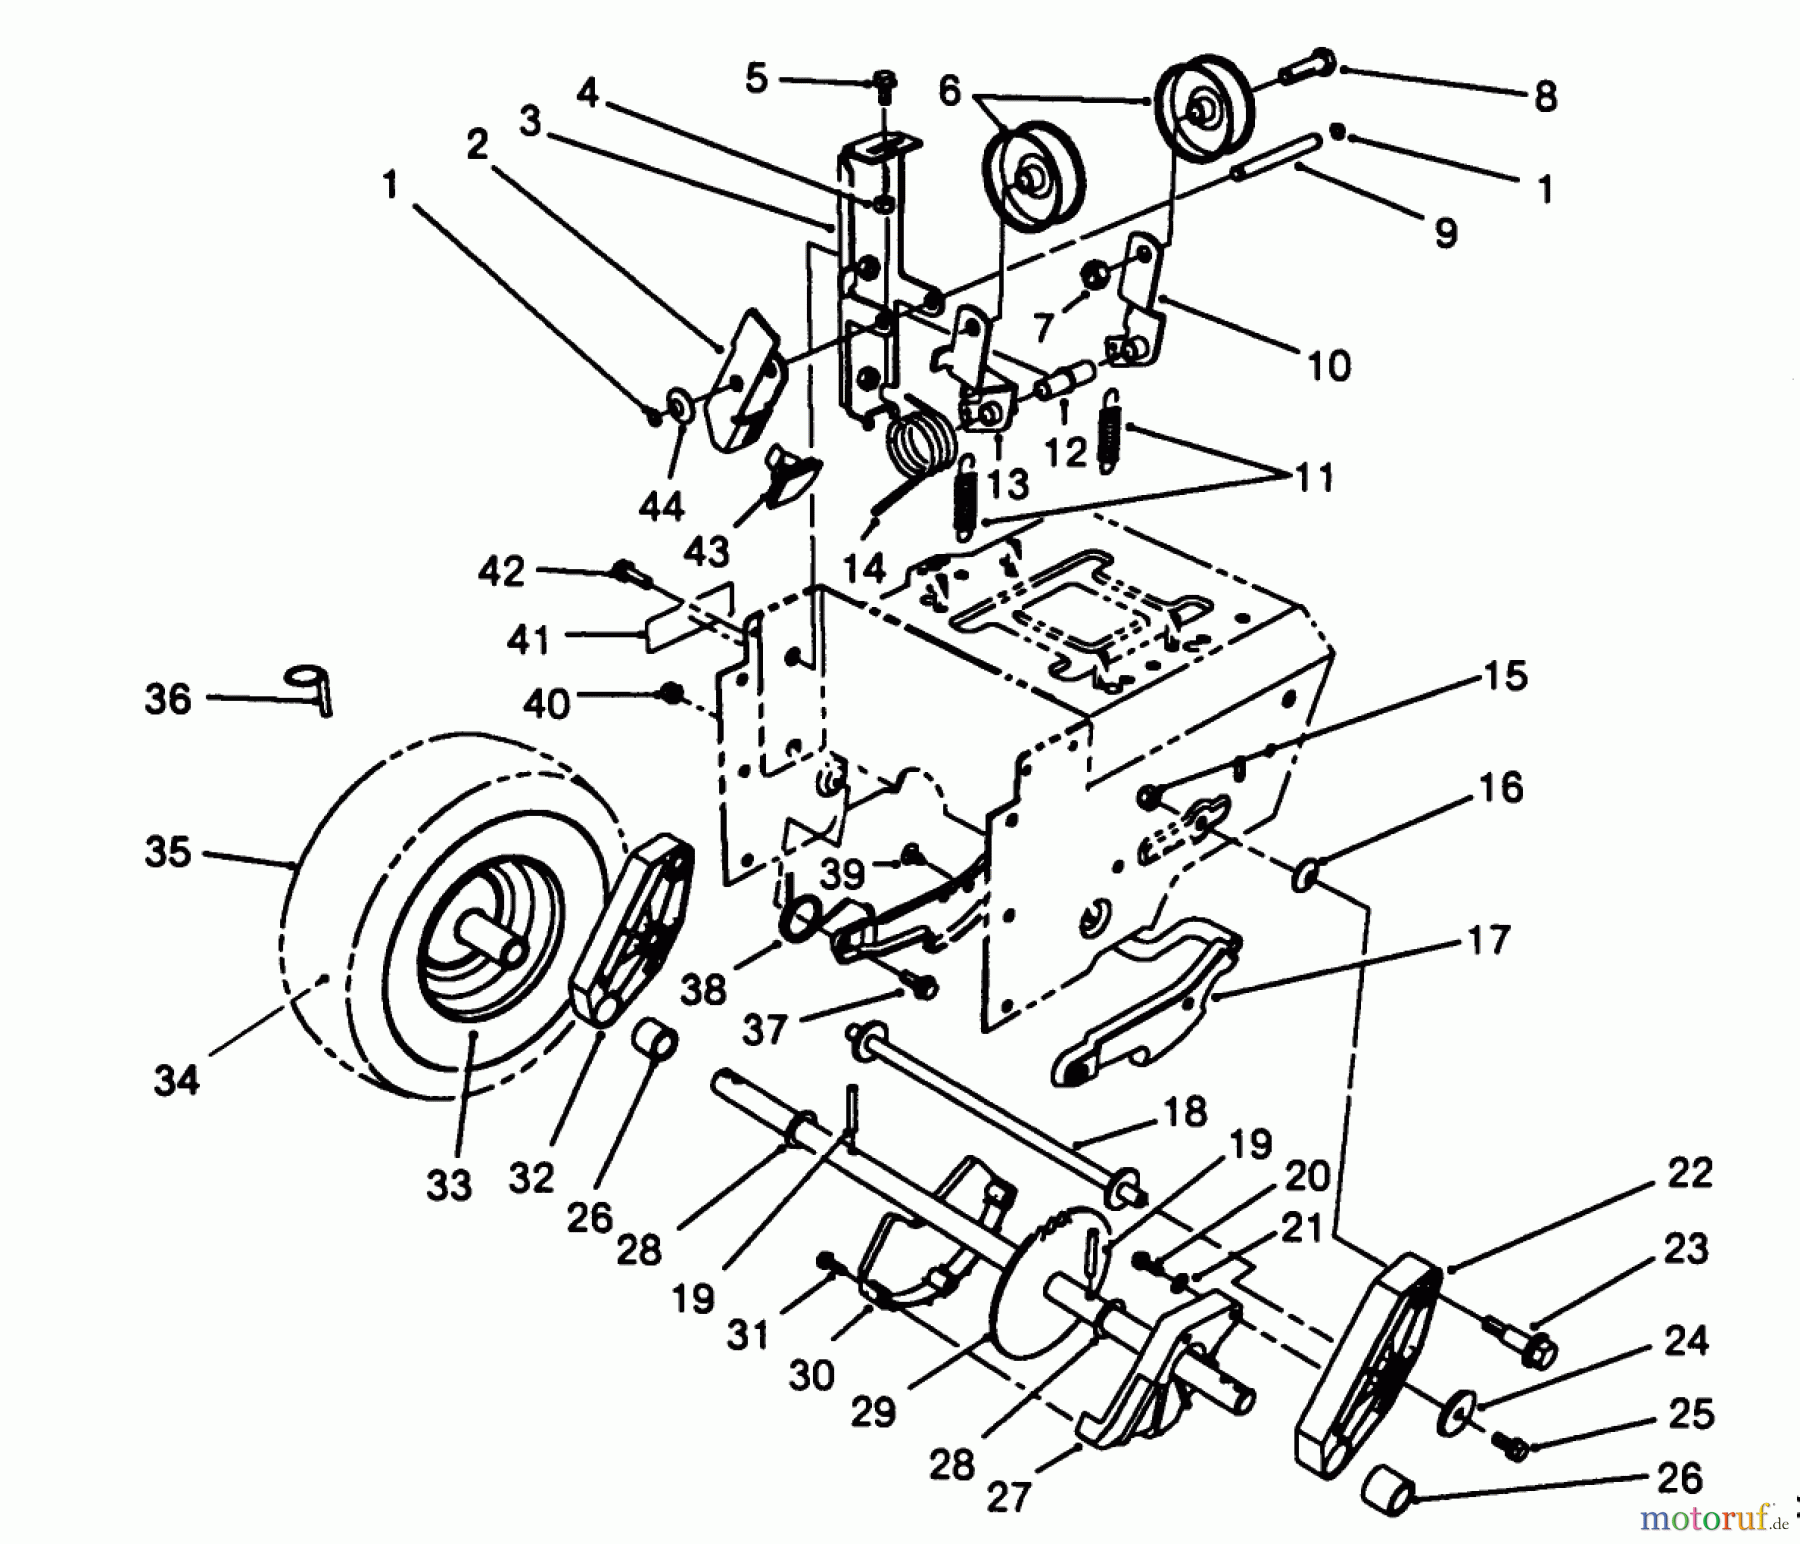  Toro Neu Snow Blowers/Snow Throwers Seite 1 38500 (624) - Toro 624 Power Shift Snowthrower, 1988 (8000001-8999999) TRACTION DRIVE ASSEMBLY